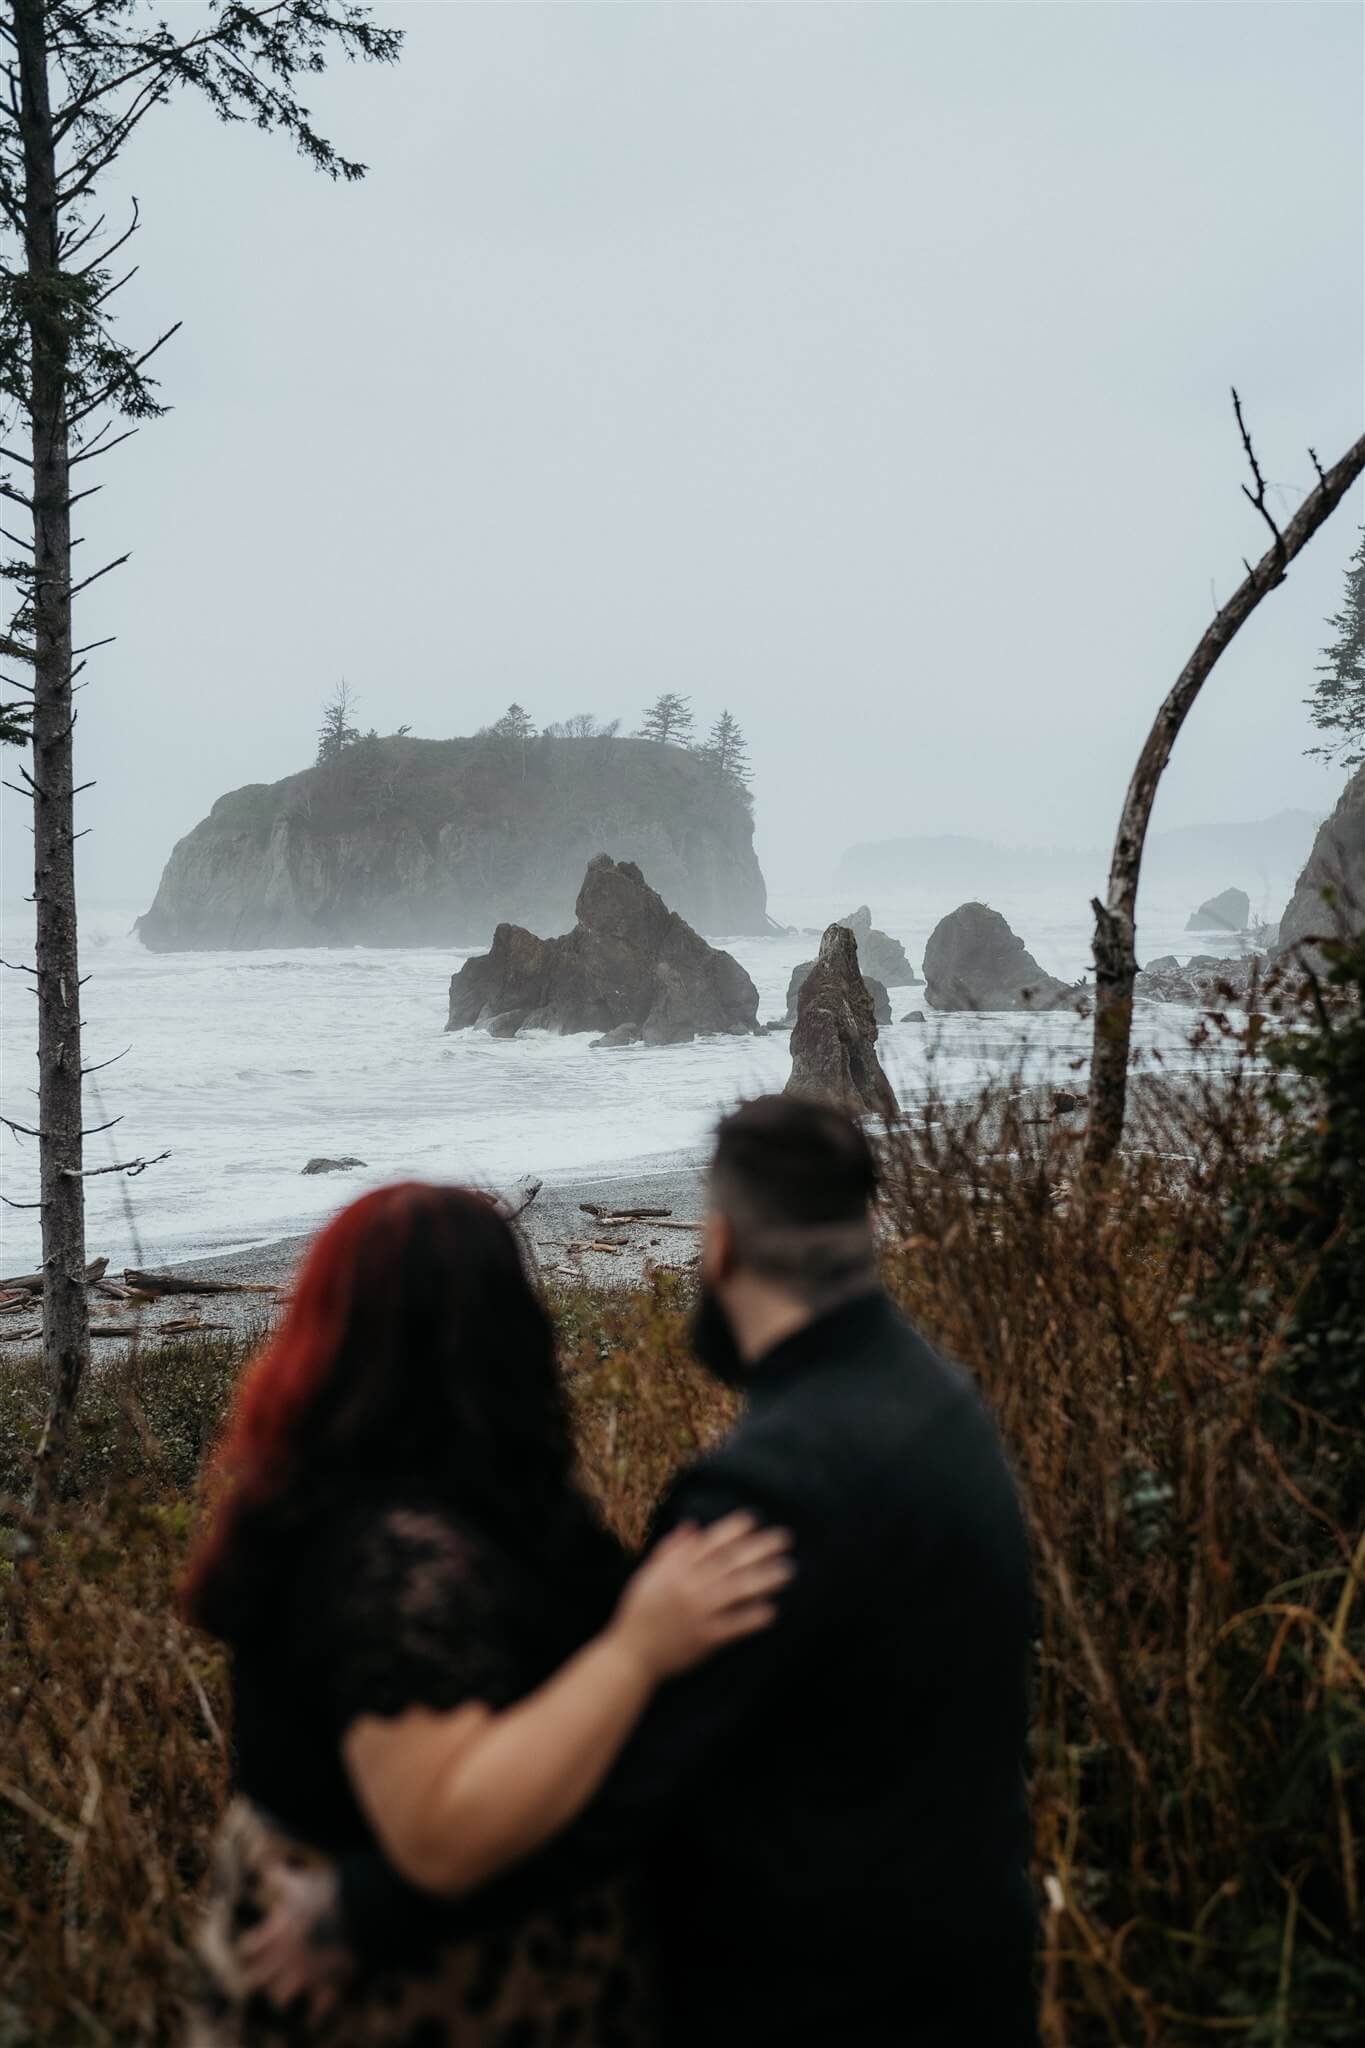 Engagement photos at Ruby Beach in Olympic National Park